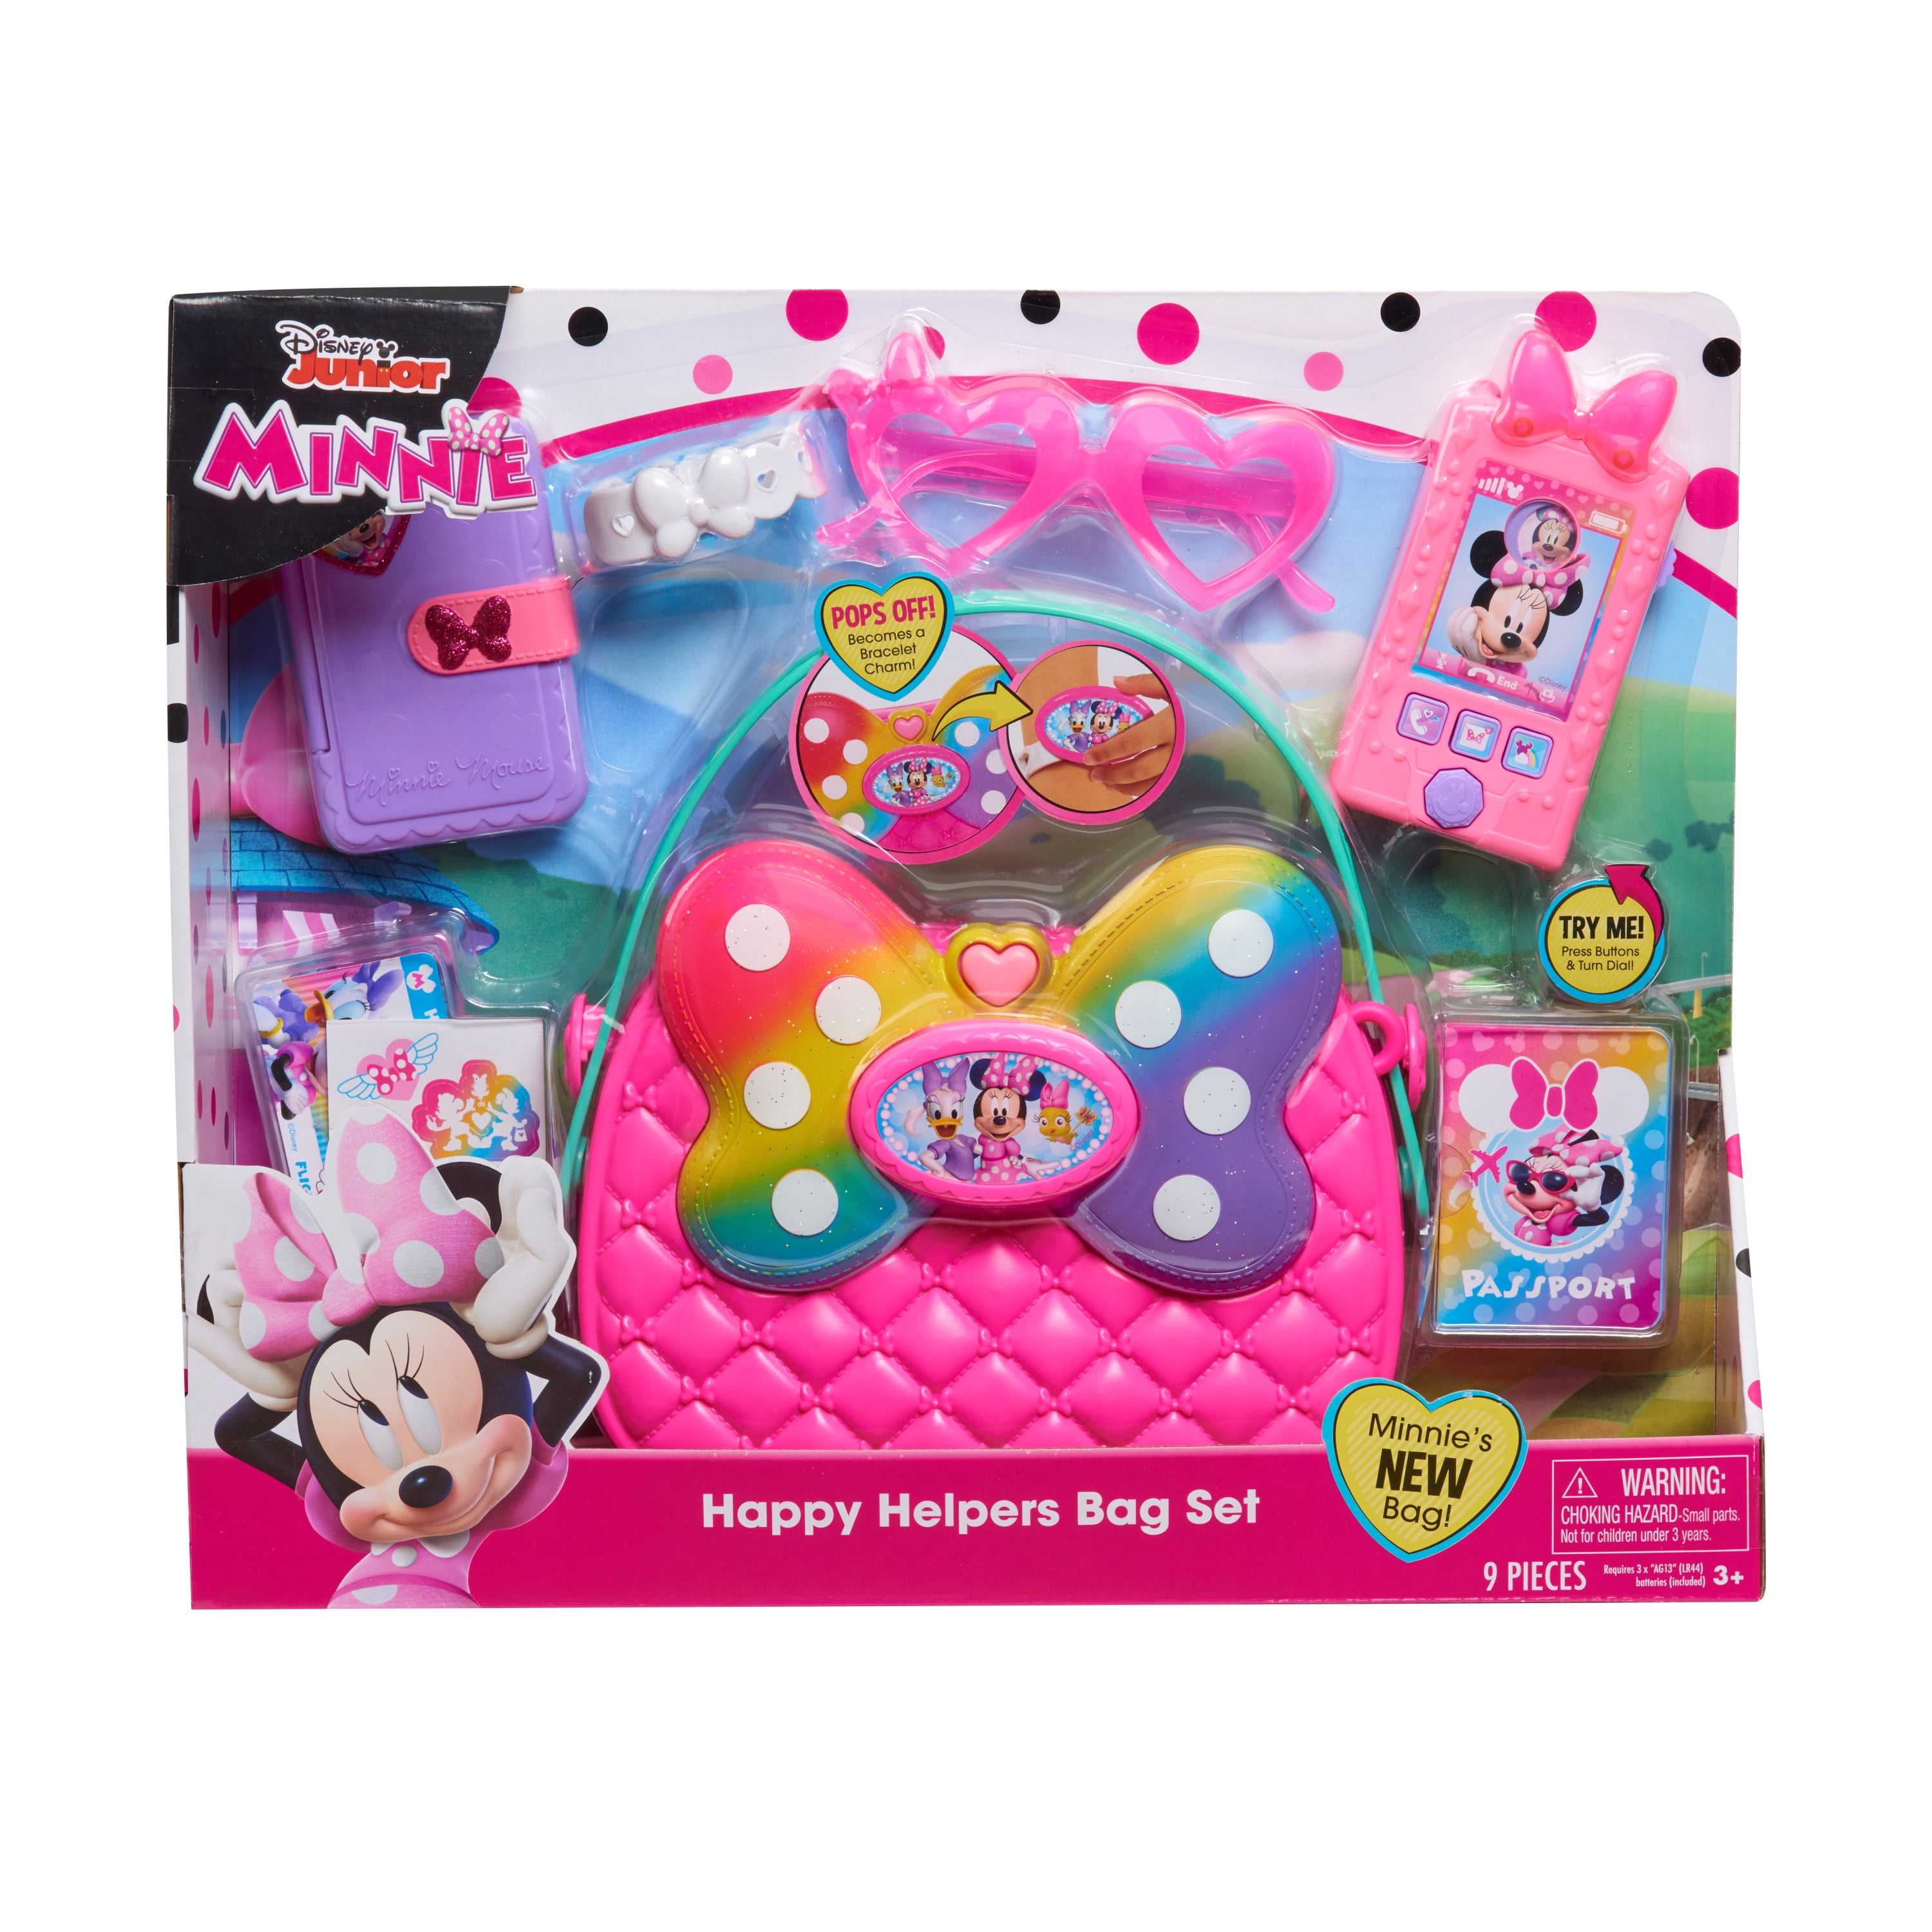 MINNIE HAPPY HELPERS PLAY MOUSE Set! 